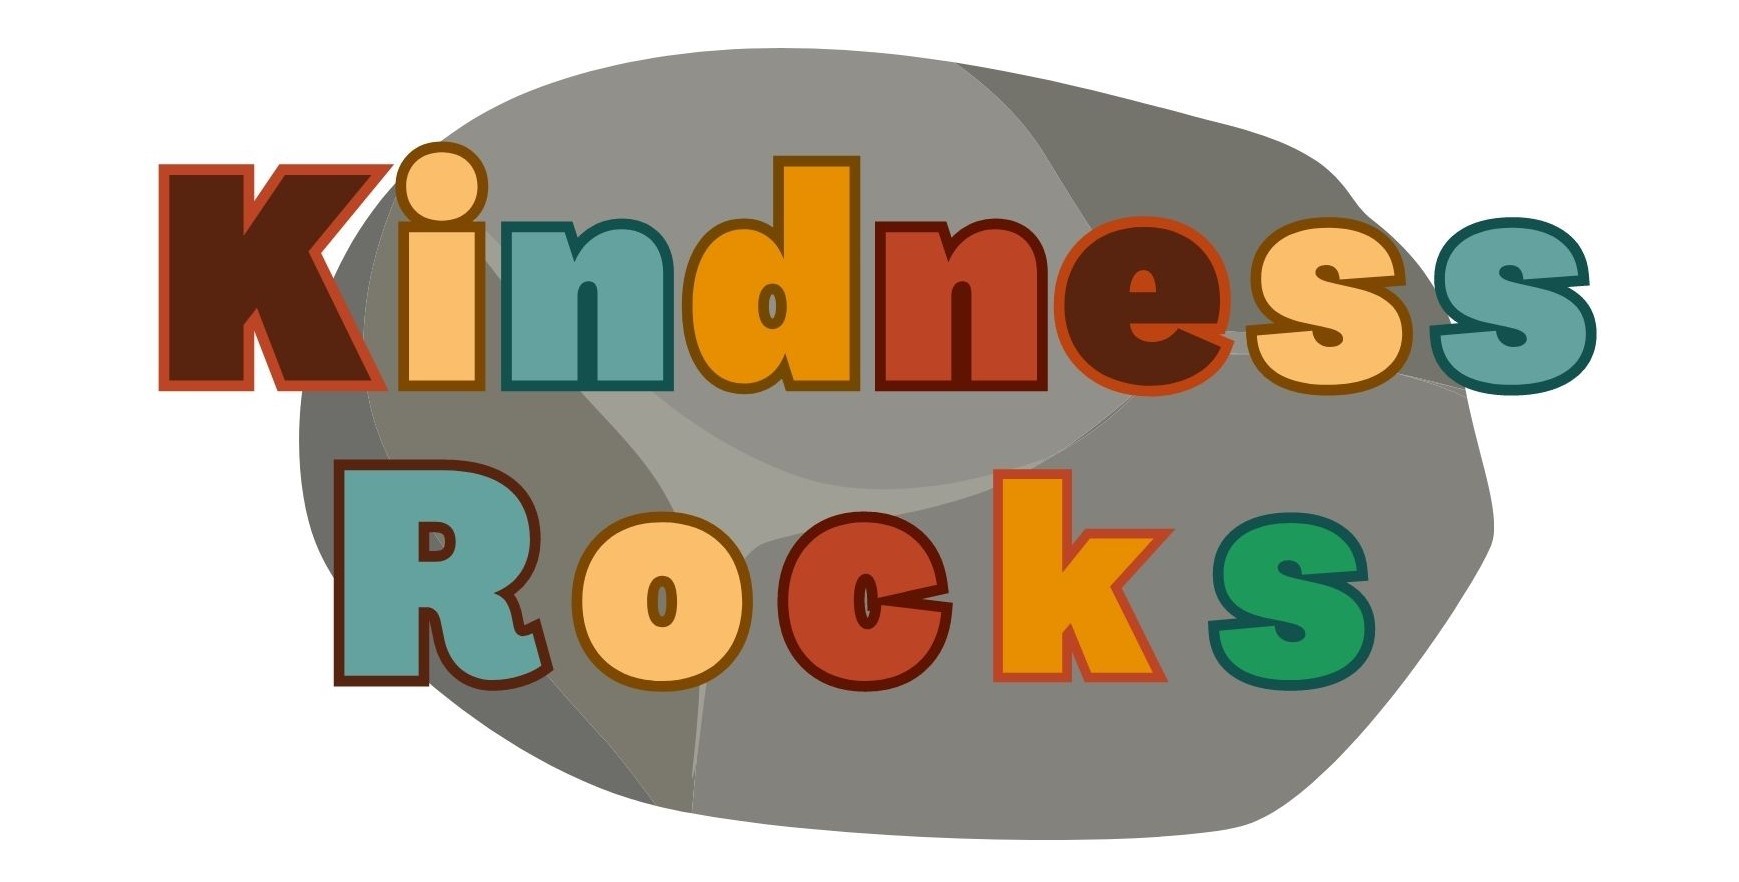 "Kindness Rocks" spelled out in colorful letters over a gray rock.